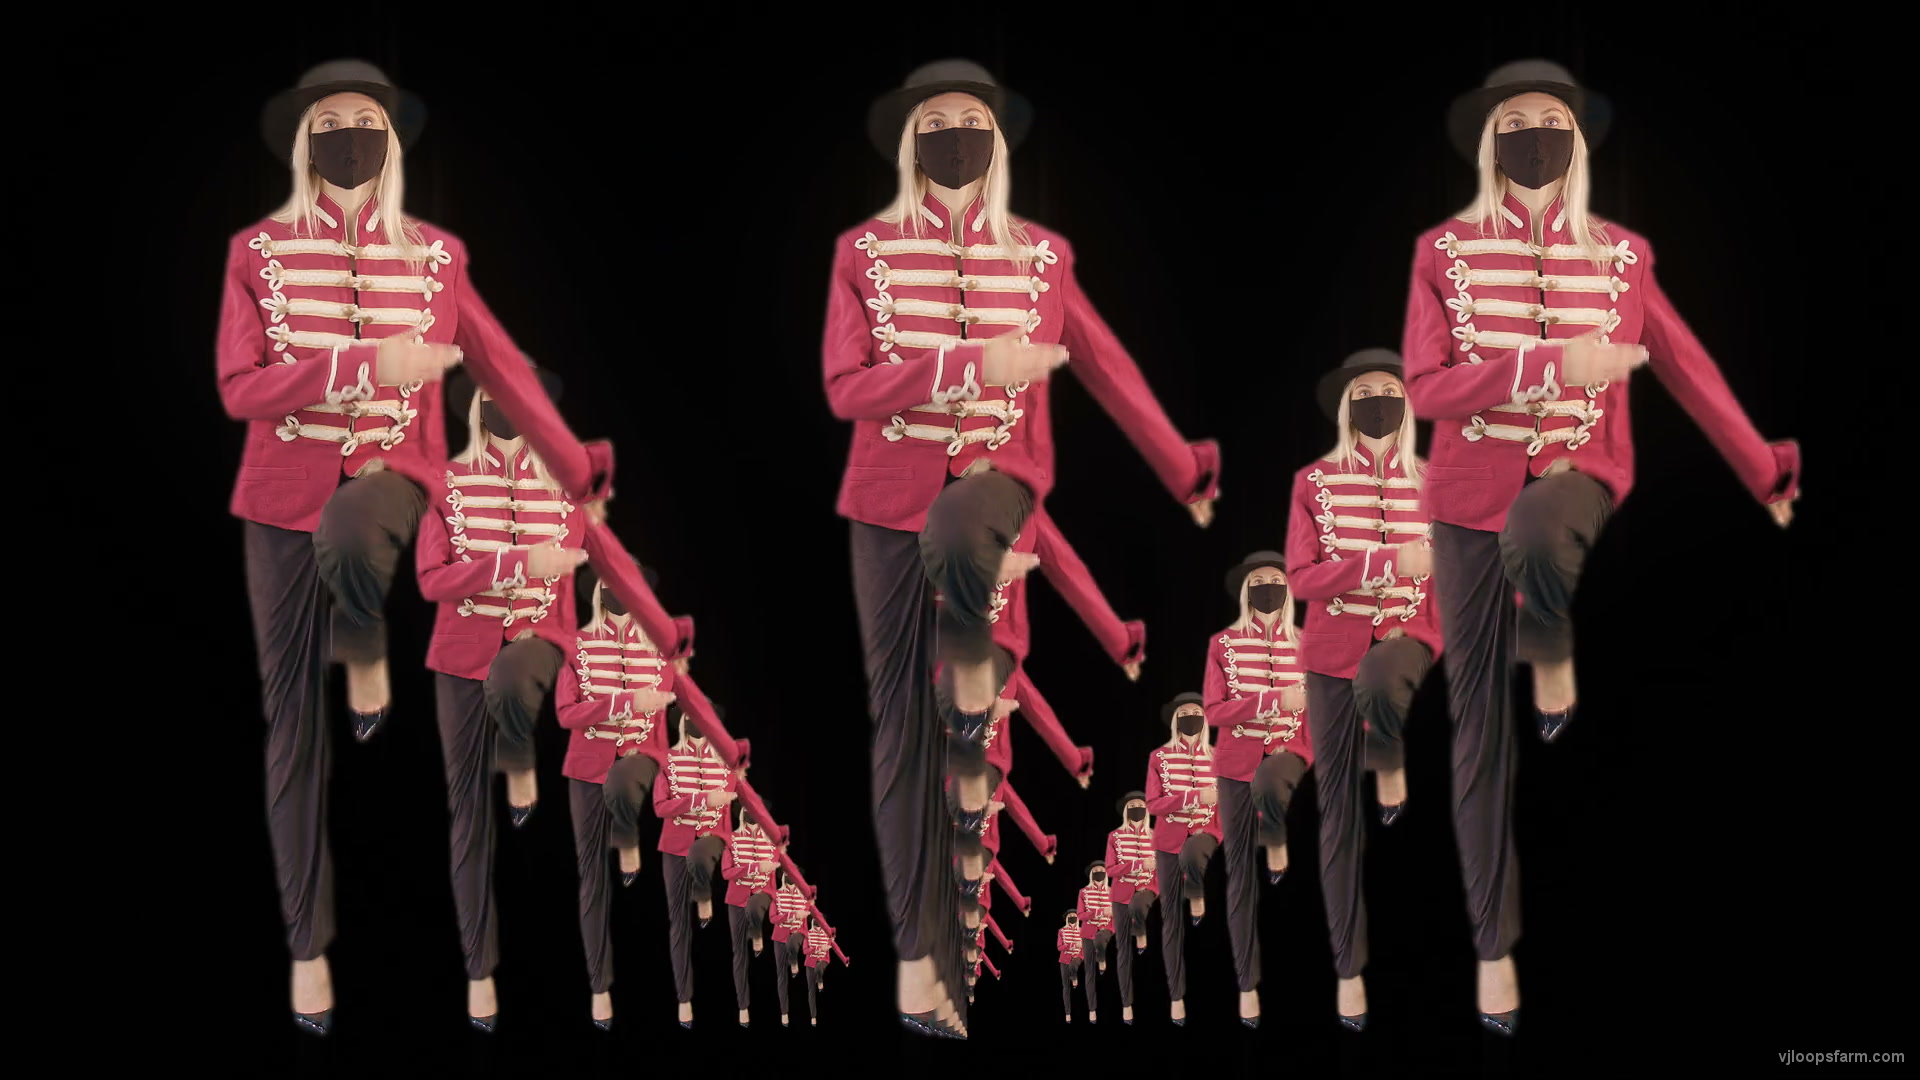 Tunnel Three Red Girls In Mask Empire royal woman marching Video Art 4K VJ Footage Looped